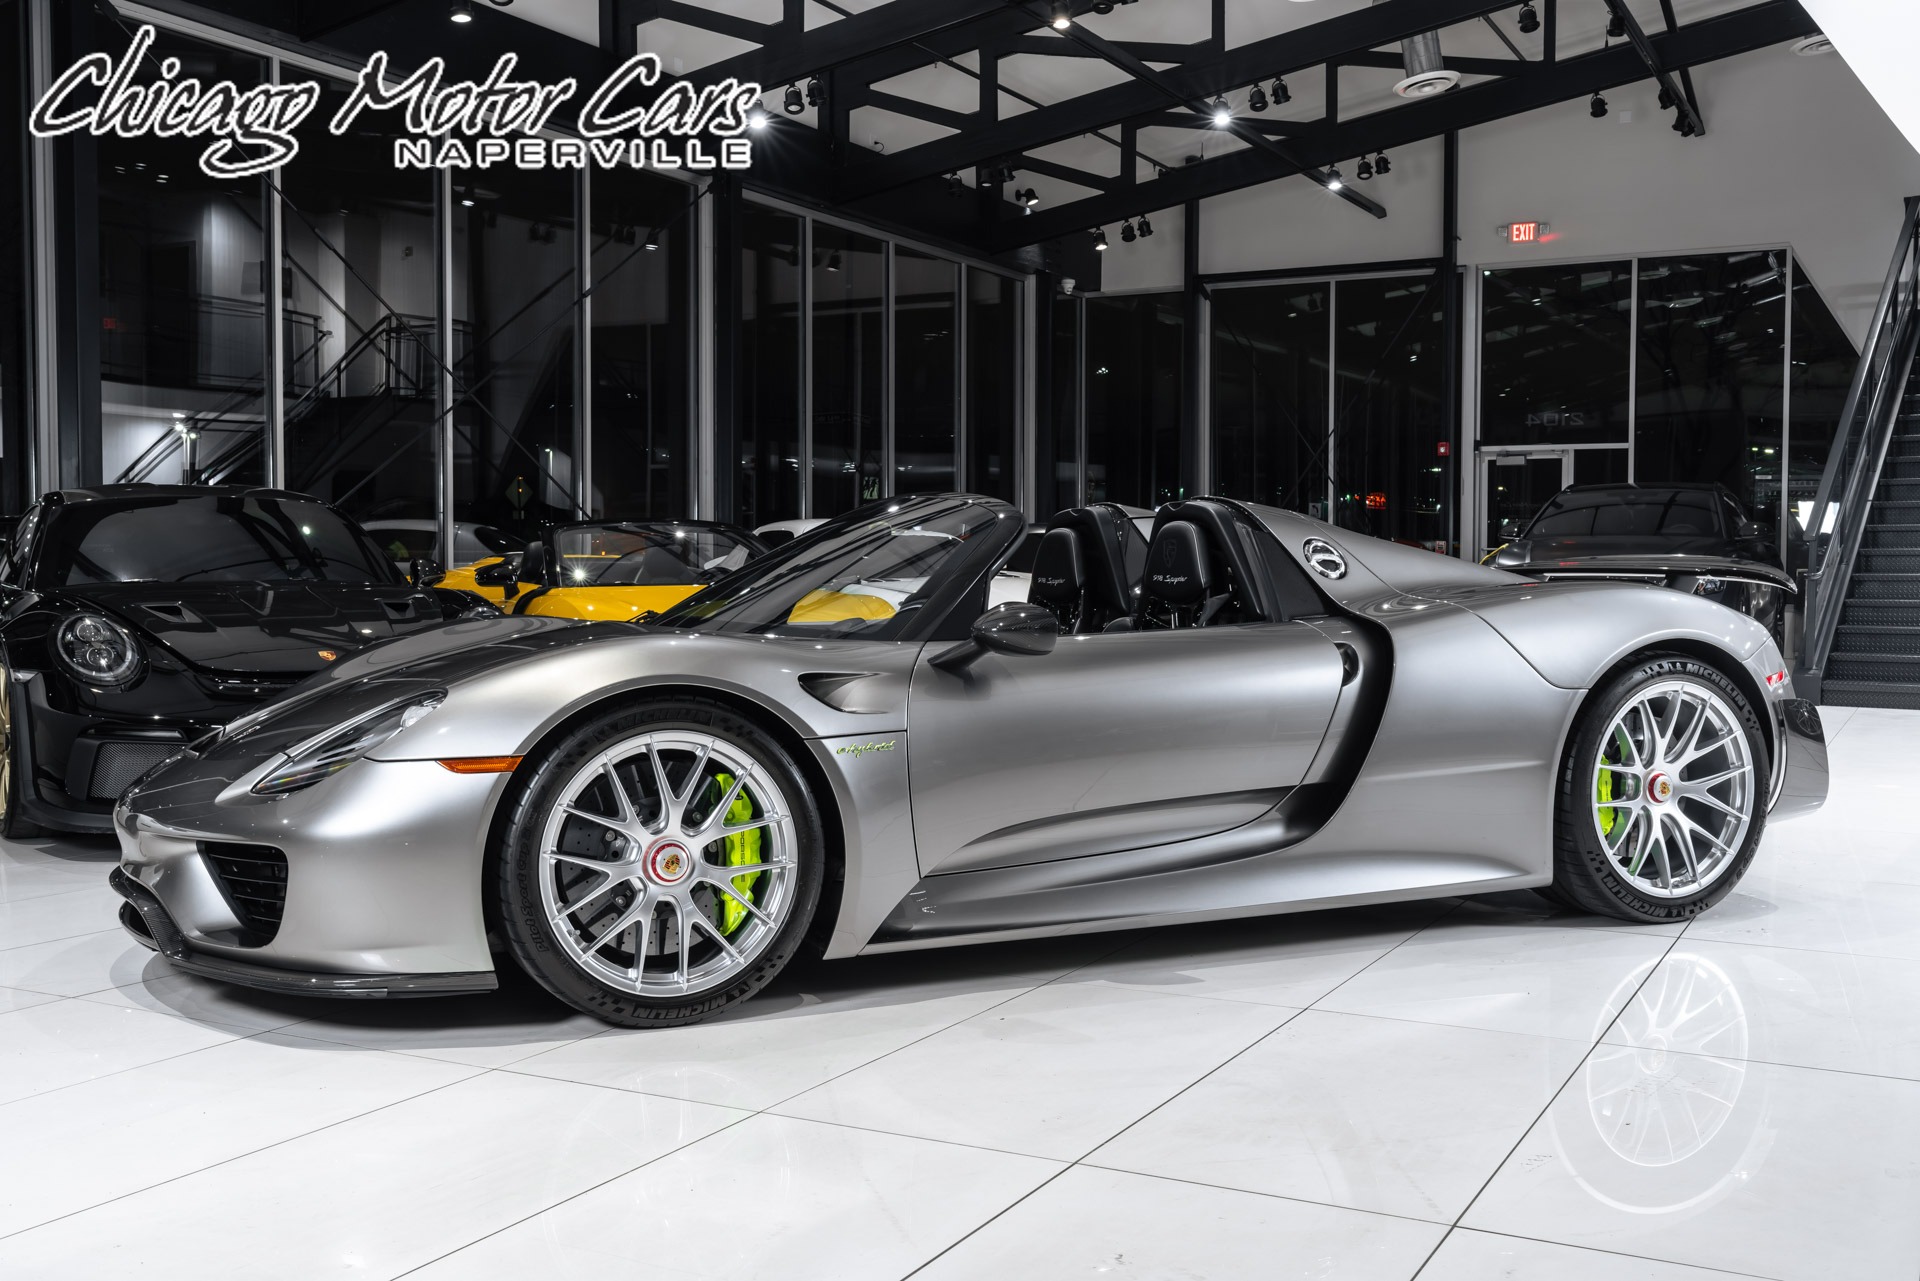 Used 2015 Porsche 918 Spyder Weissach Package Liquid Silver Paint! Front  Lift! Serviced! Carbon Fiber! For Sale (Special Pricing)